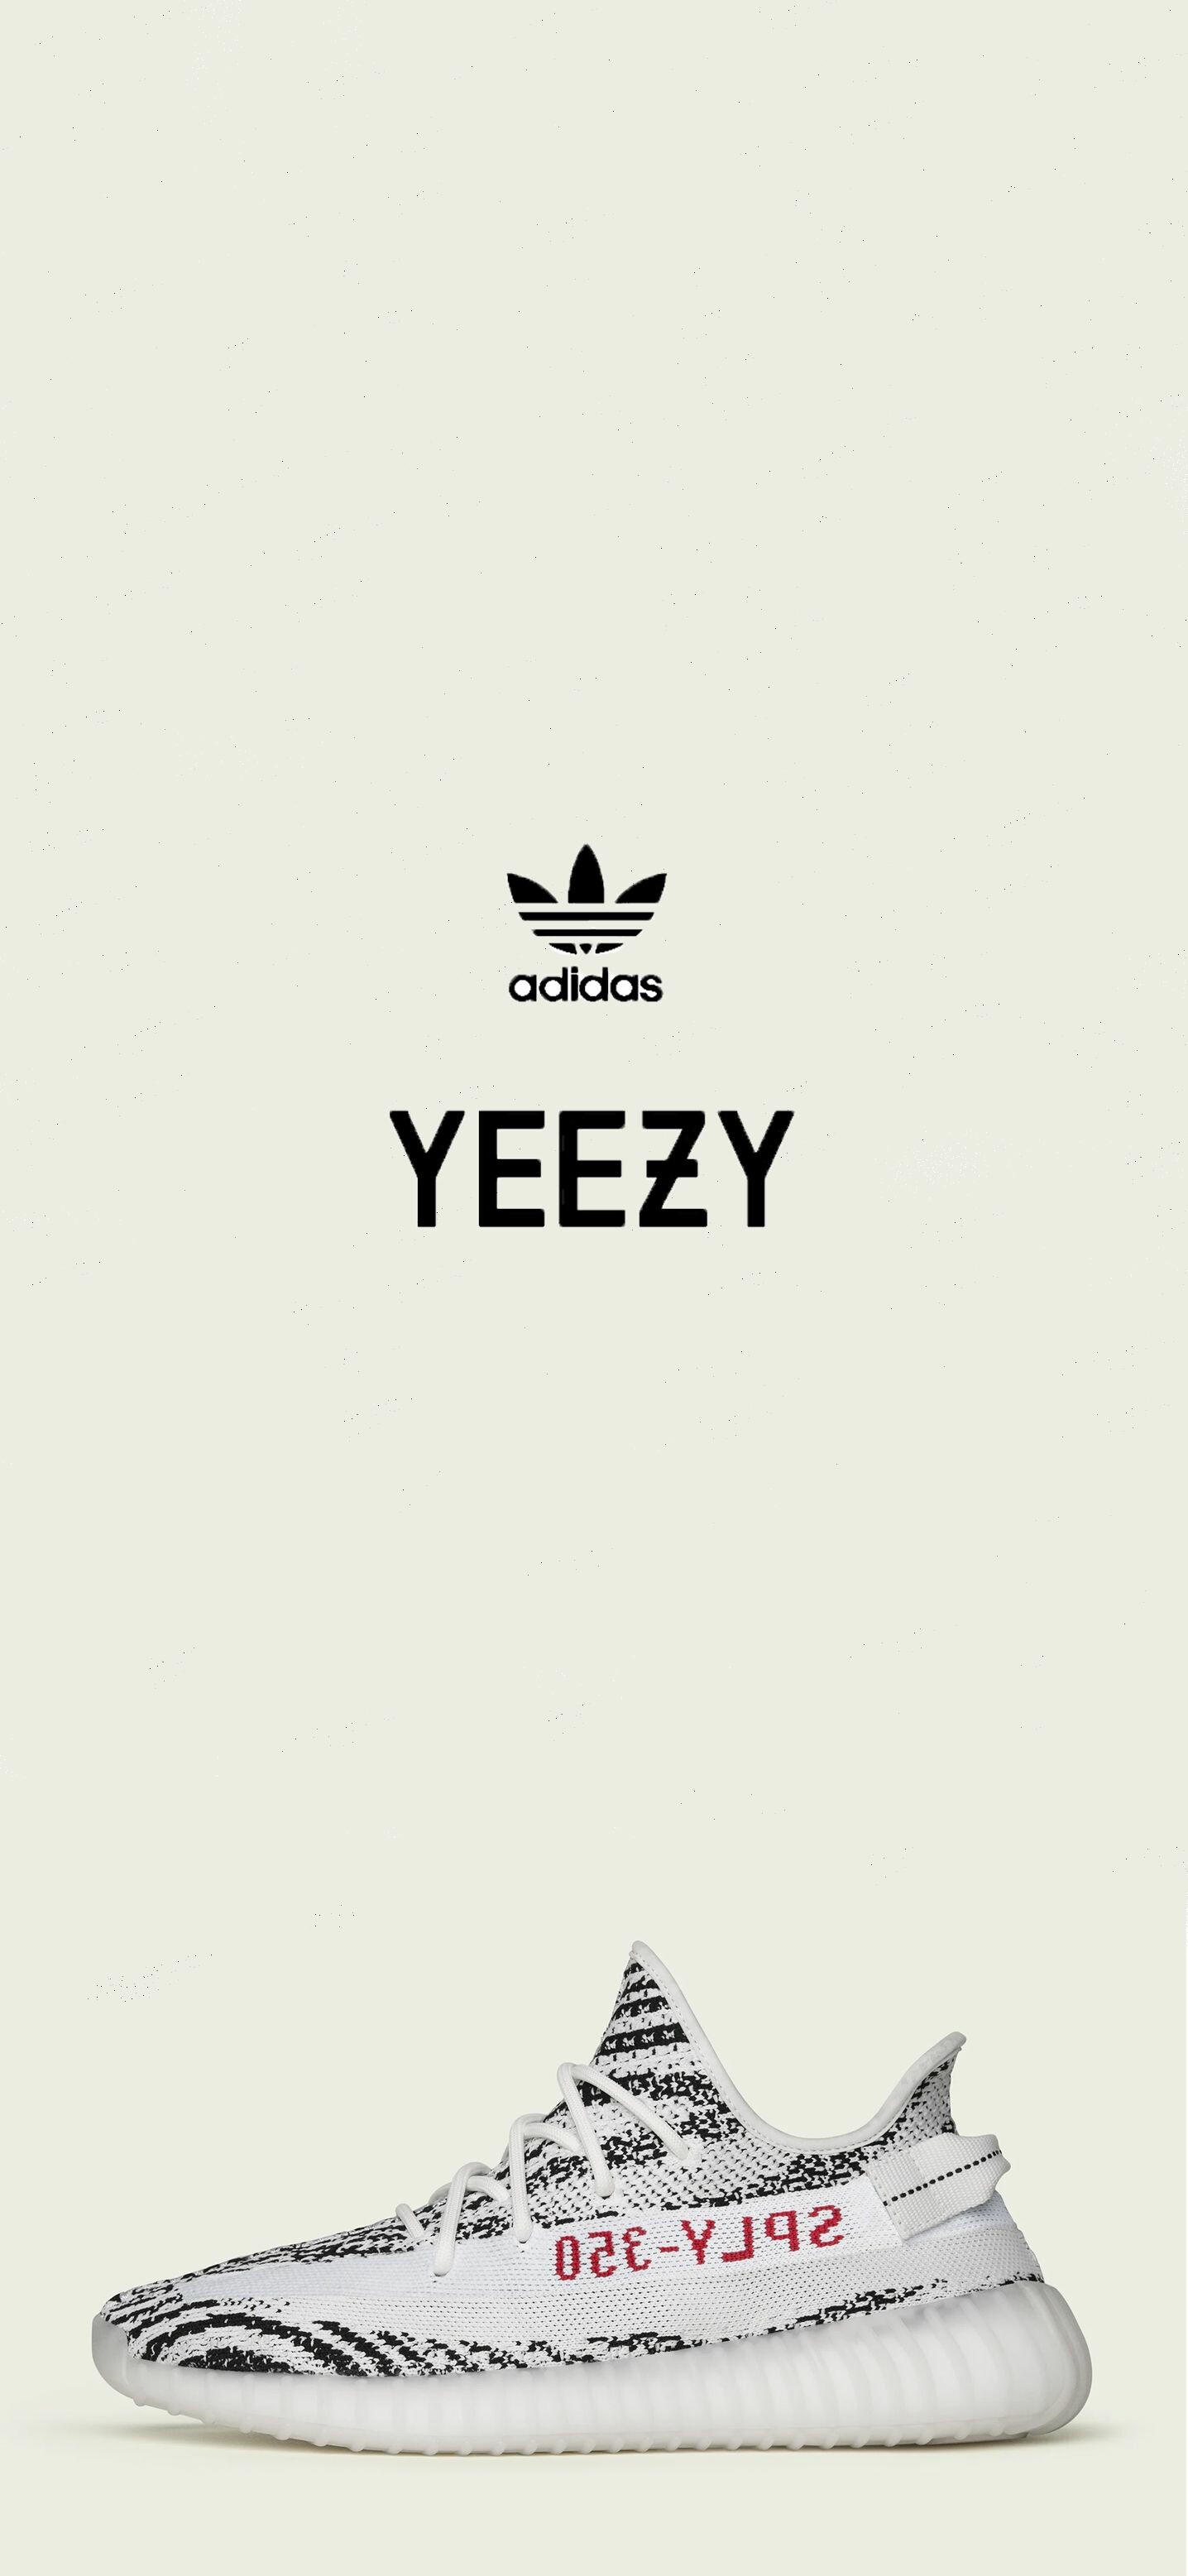 Yeezy: The brand offered sneakers in limited edition colorways. 1440x3120 HD Background.